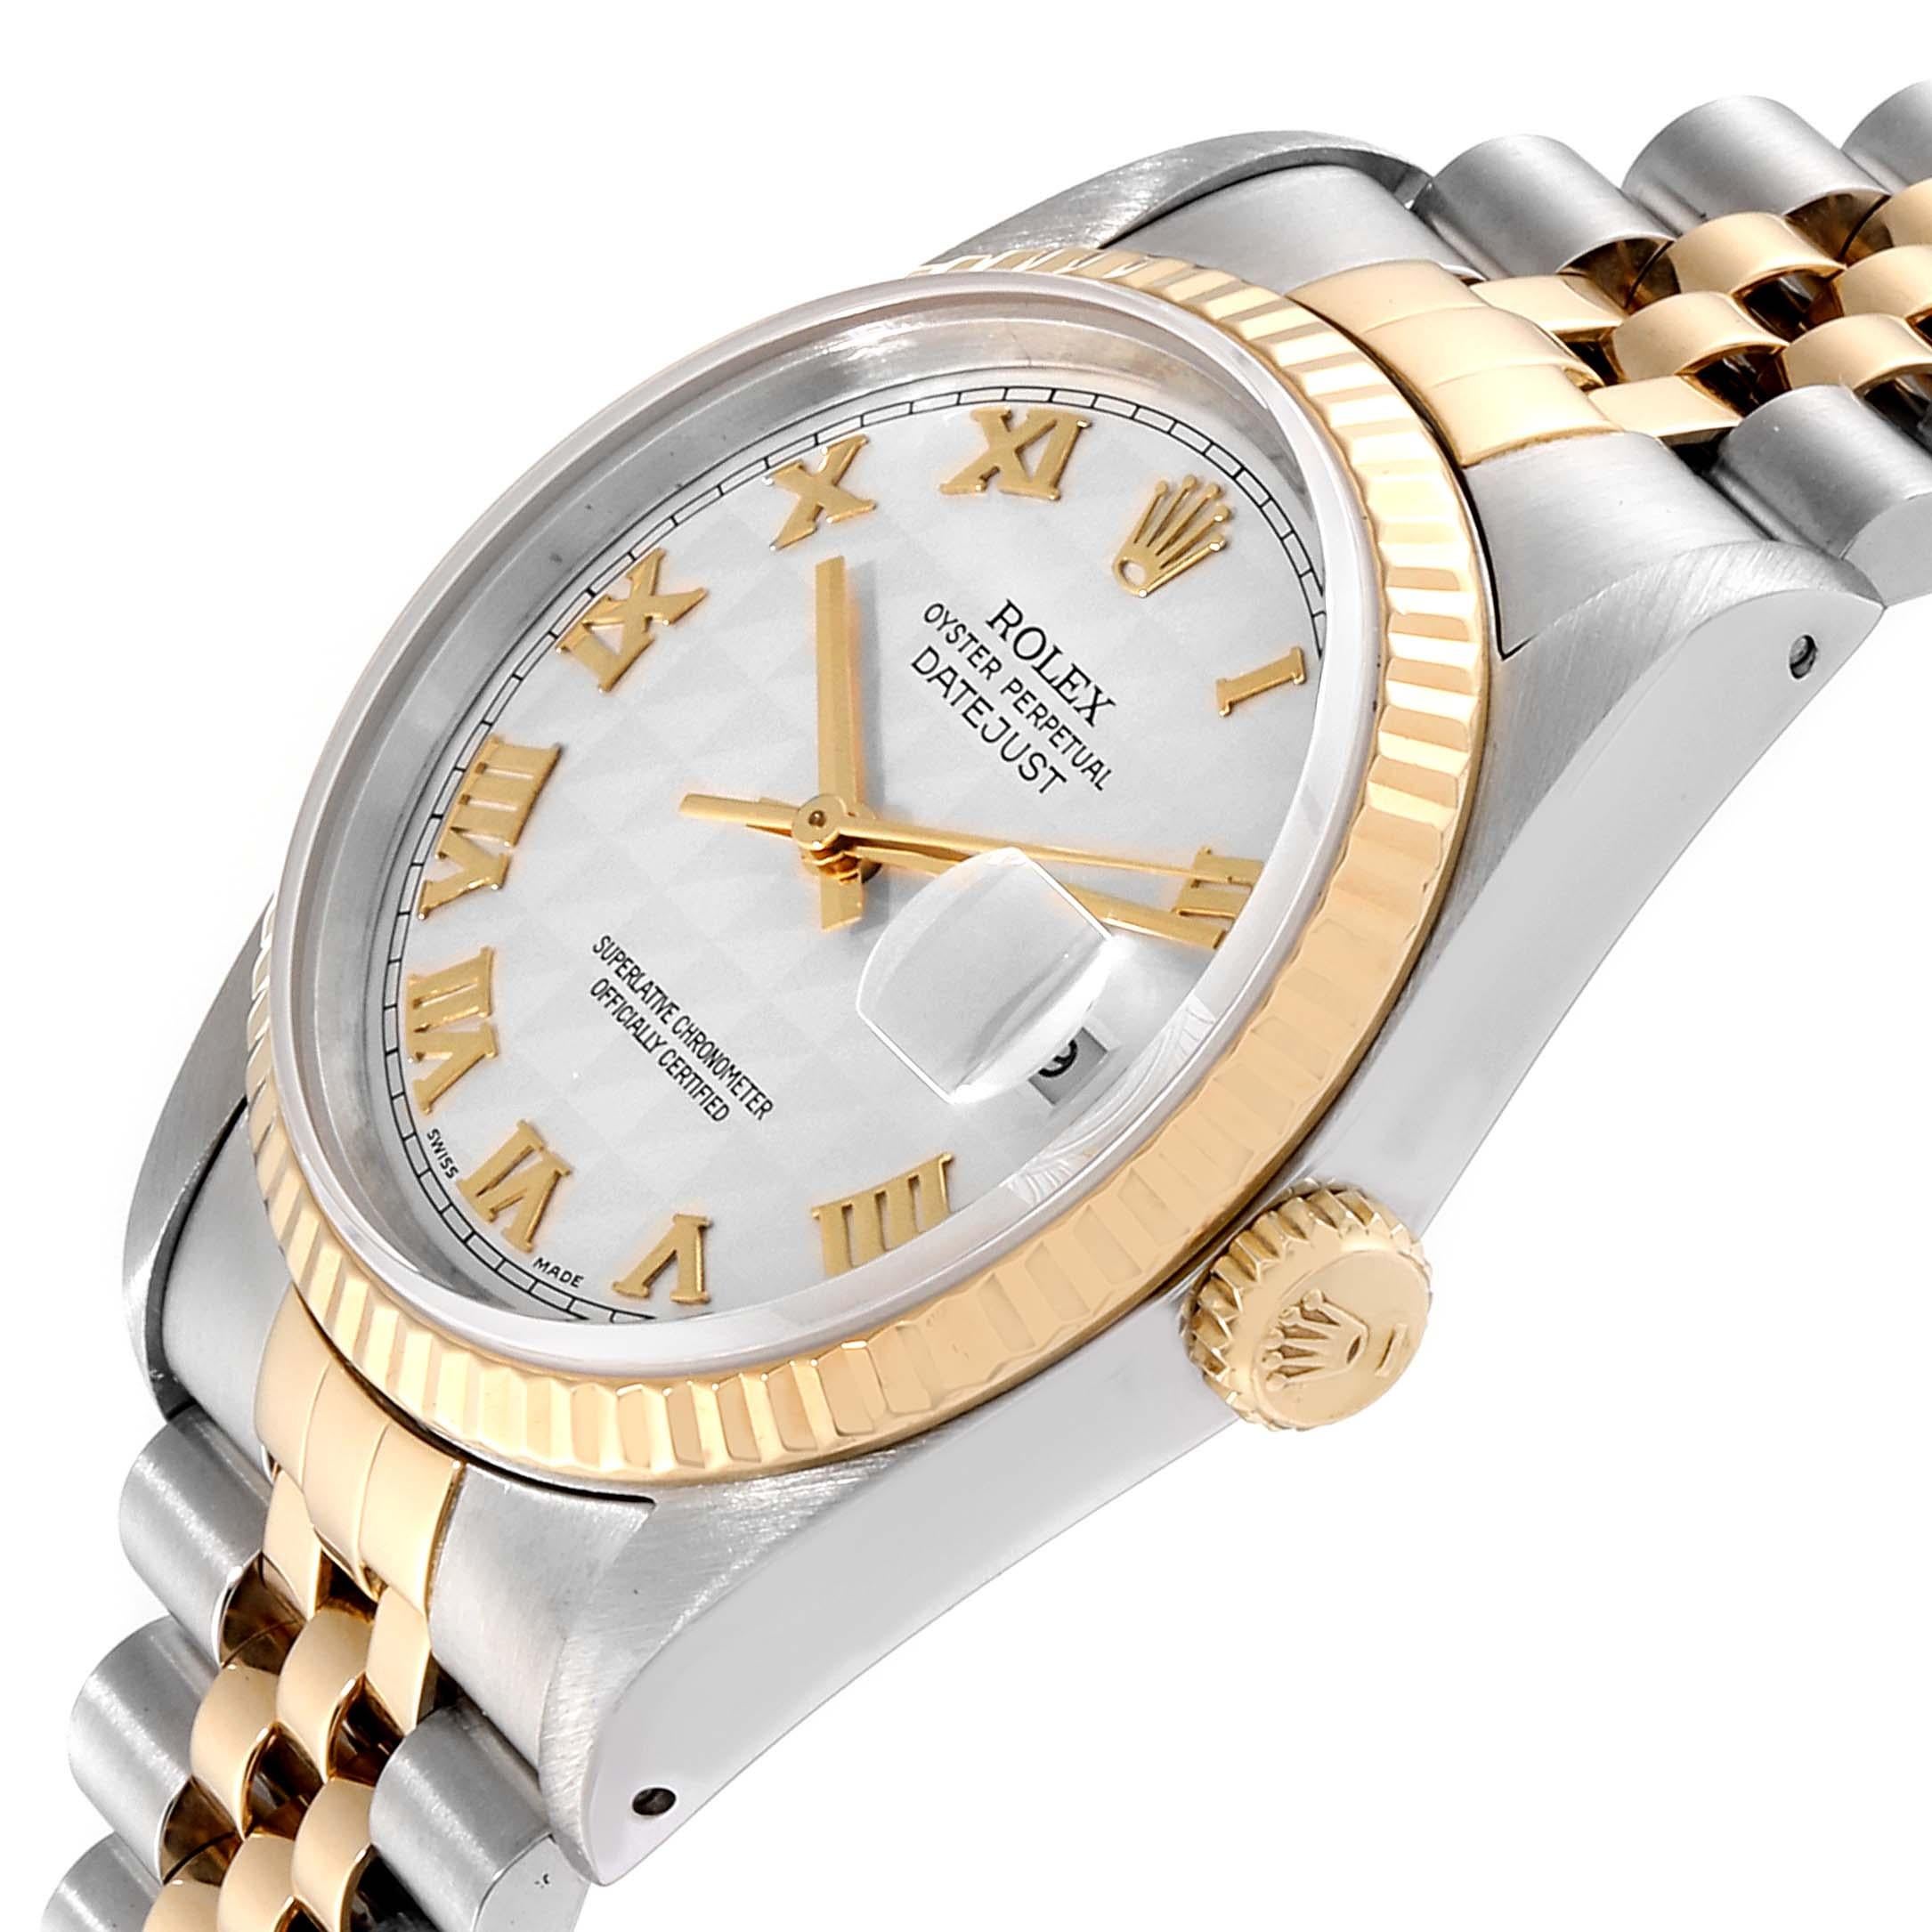 Rolex Datejust Steel Yellow Gold Pyramid Roman Dial Men's Watch 16233 For Sale 2